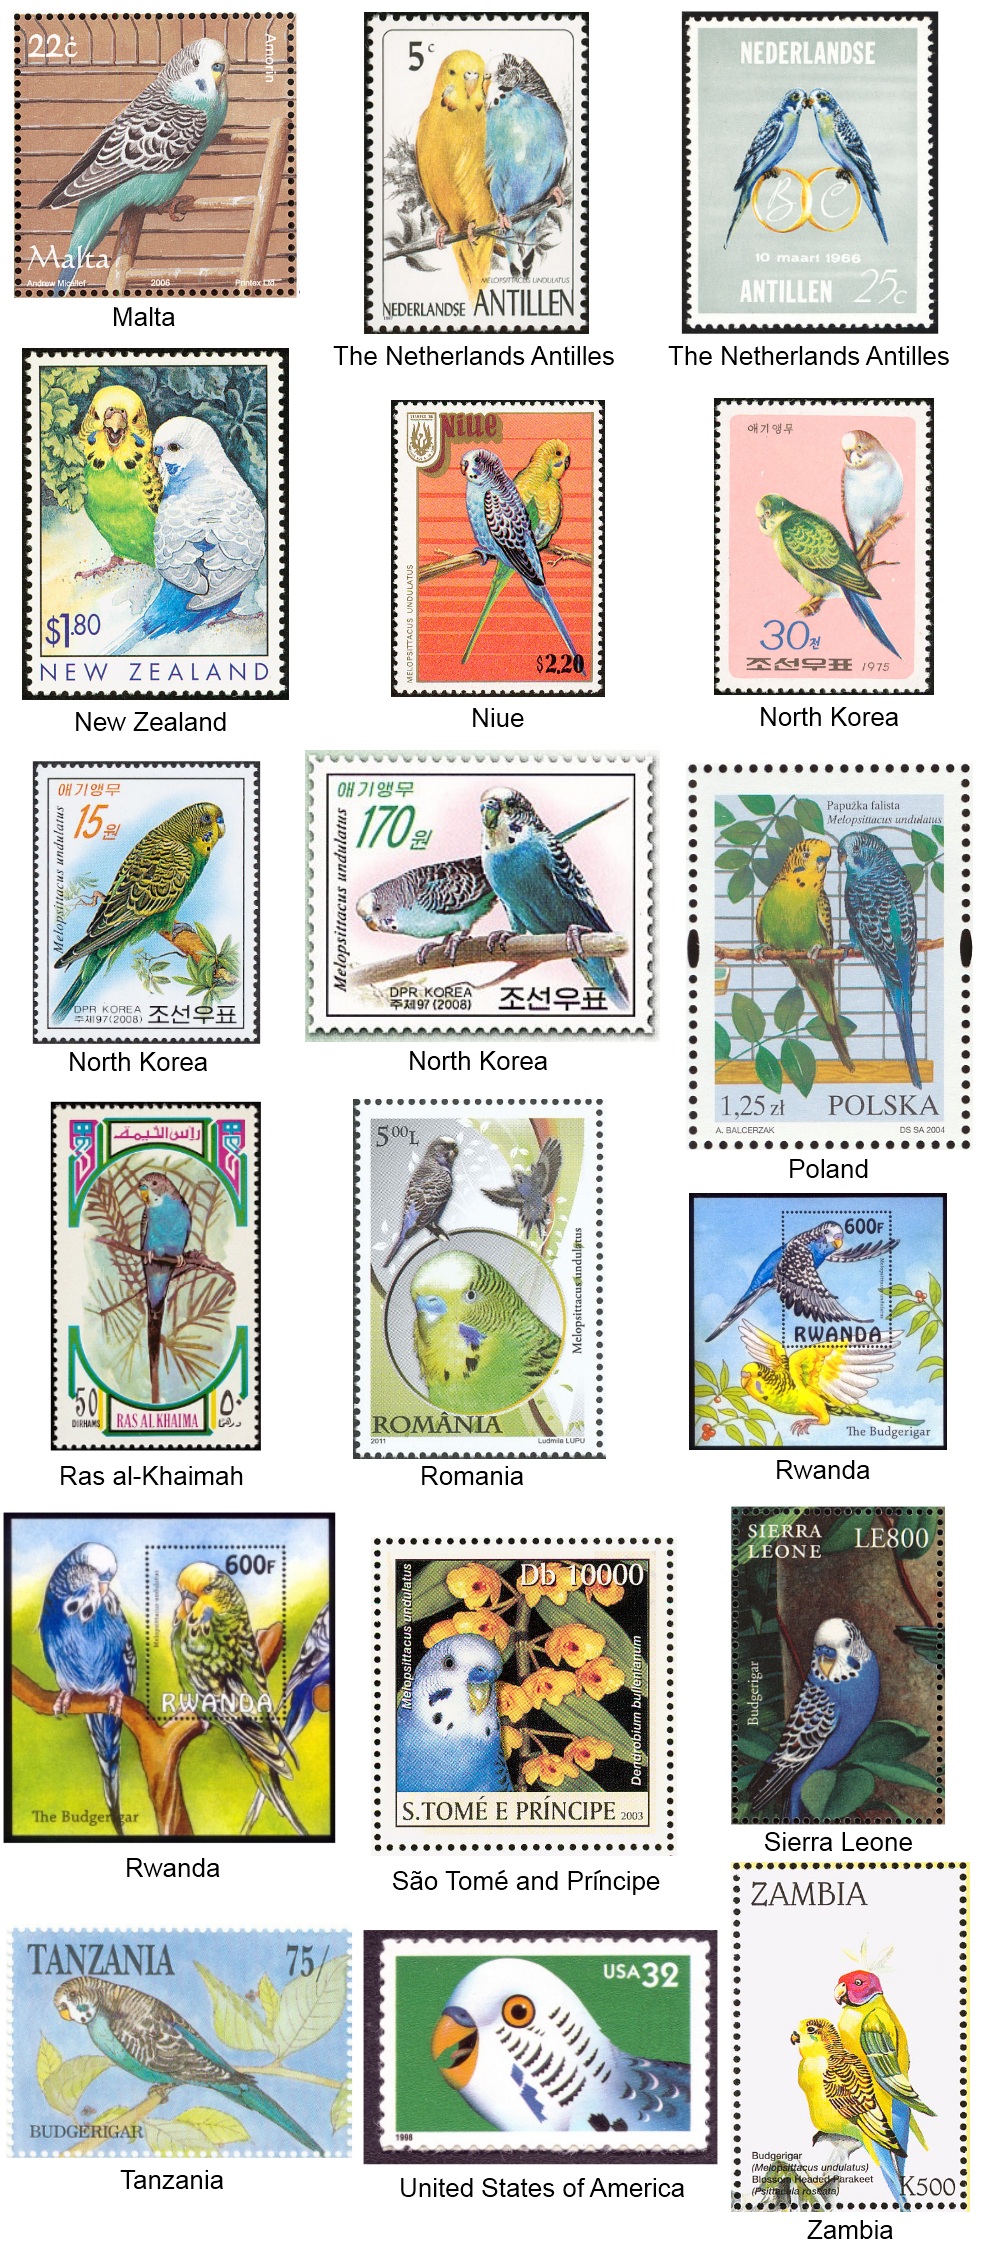 October is National Stamp Collecting Month